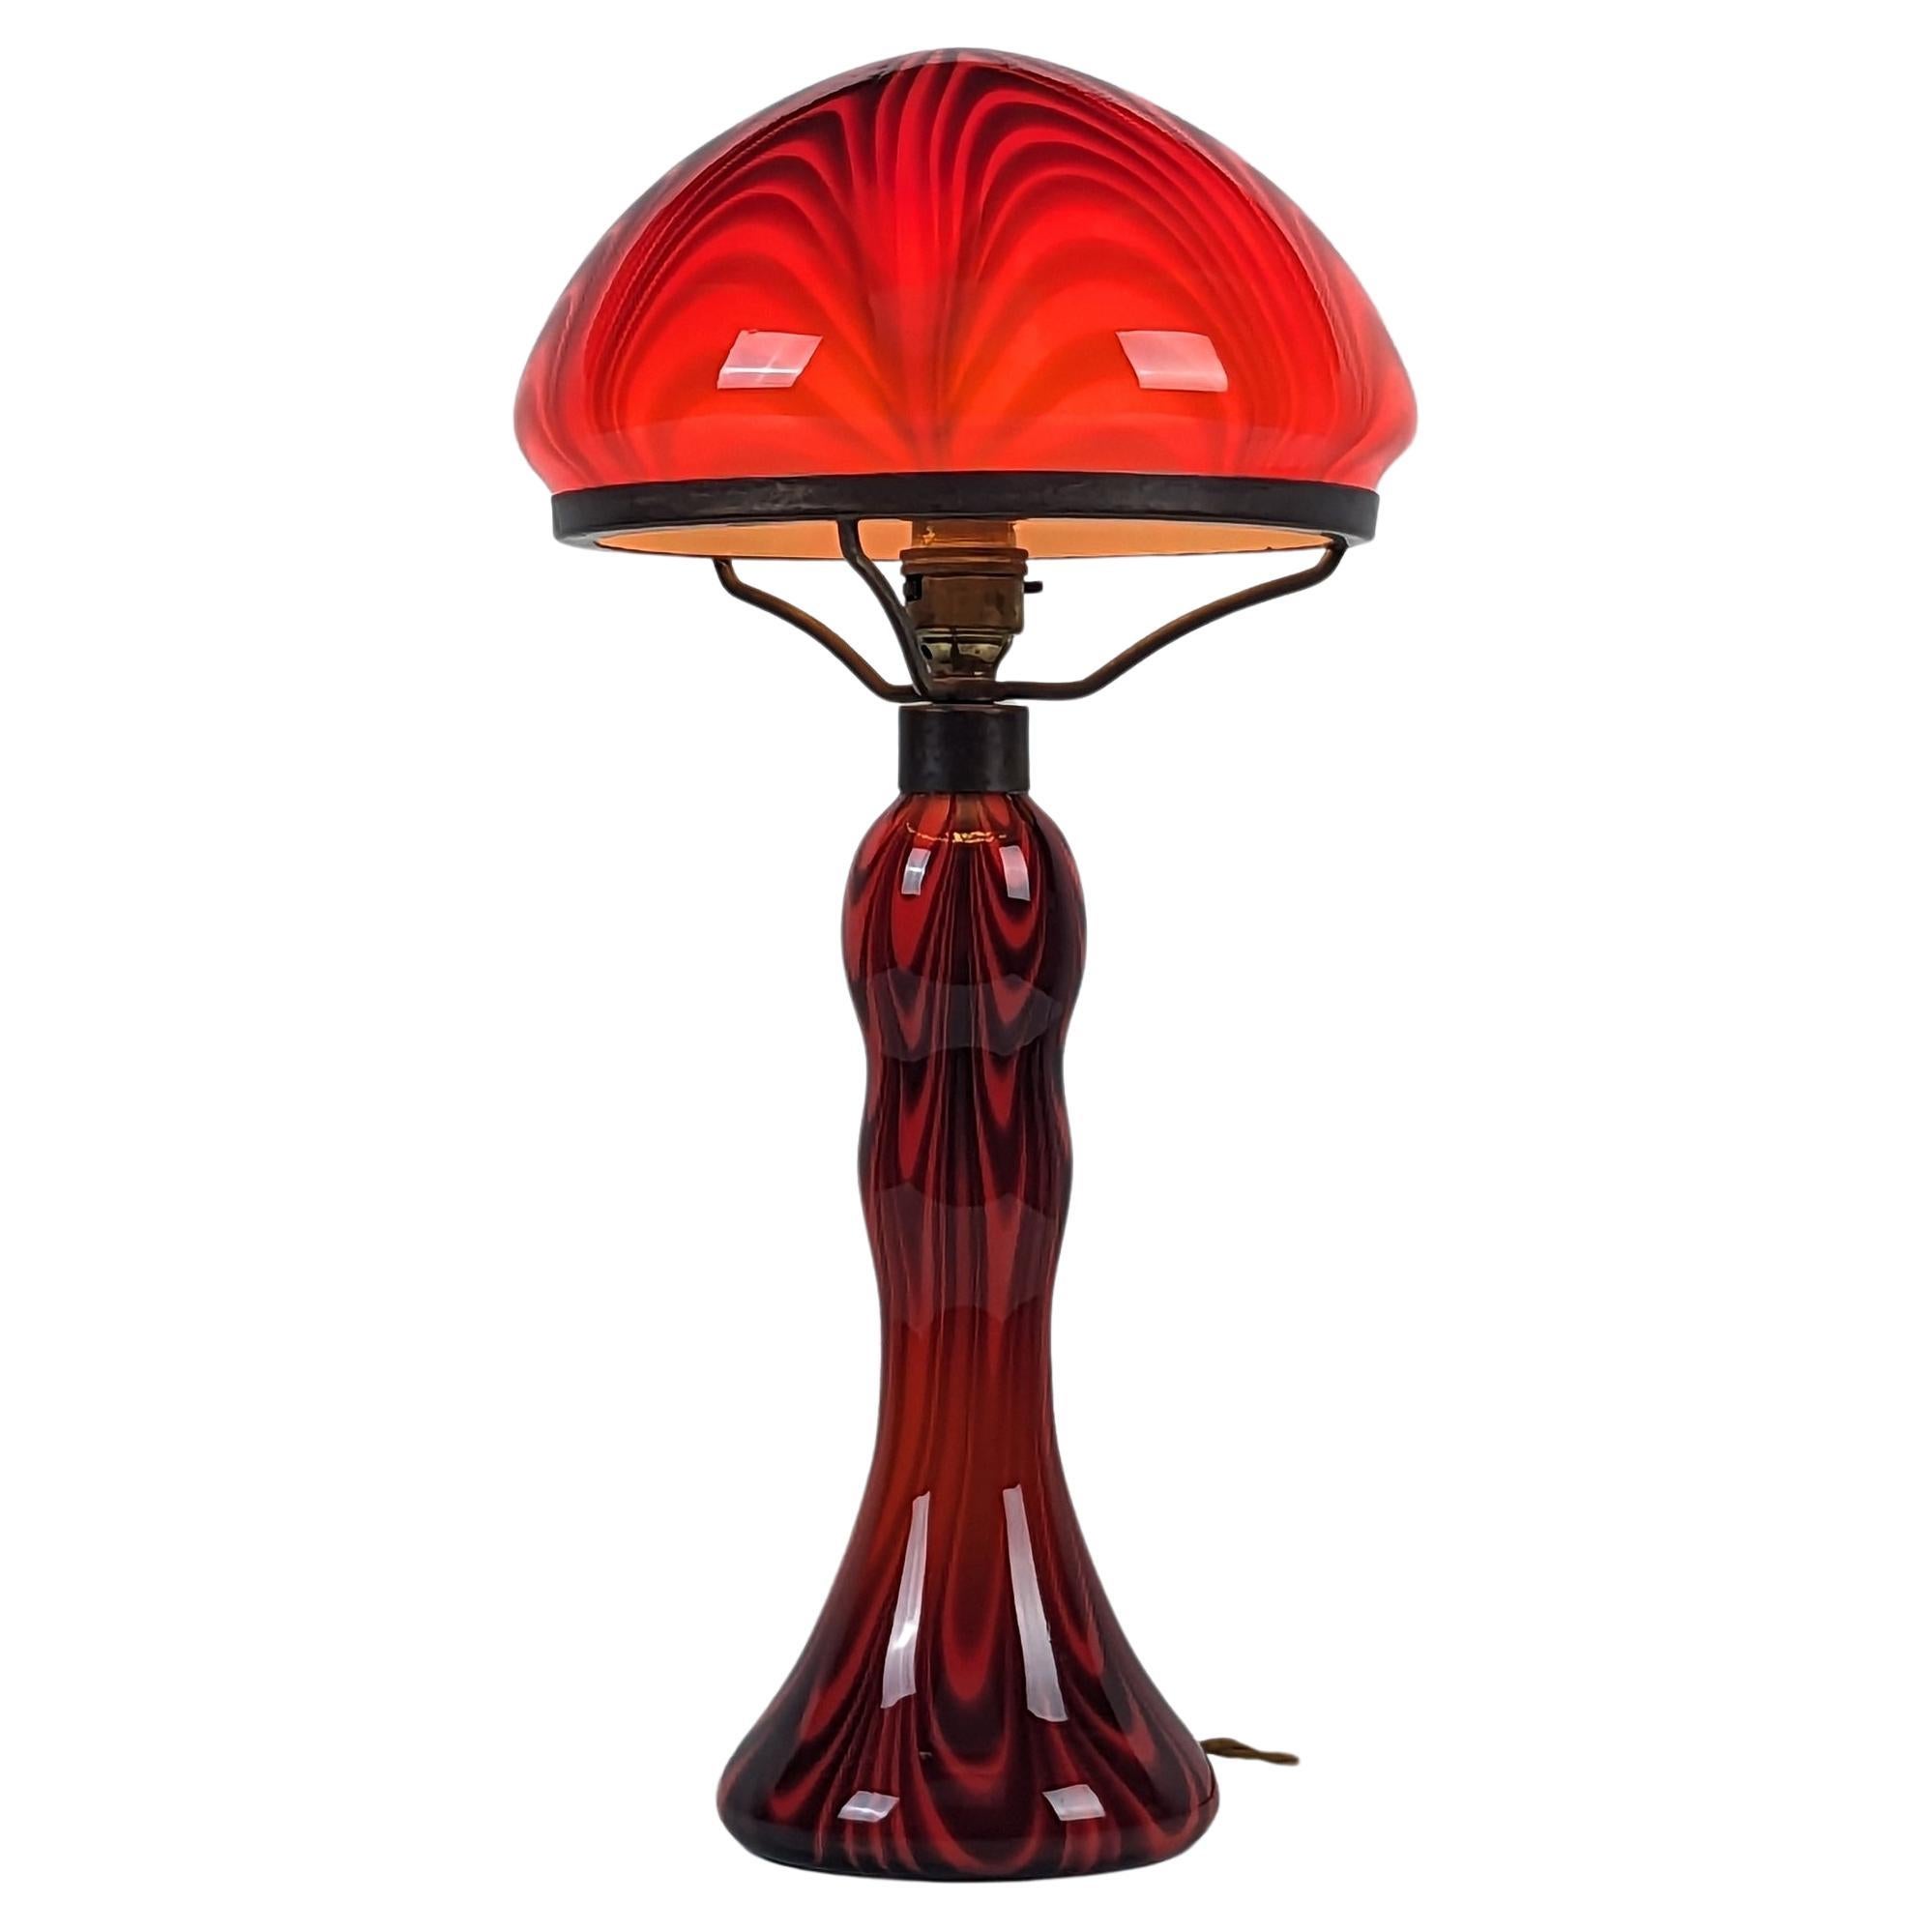 Vintage glass table lamp in the style of La Rochere, 1960s mid-century, original